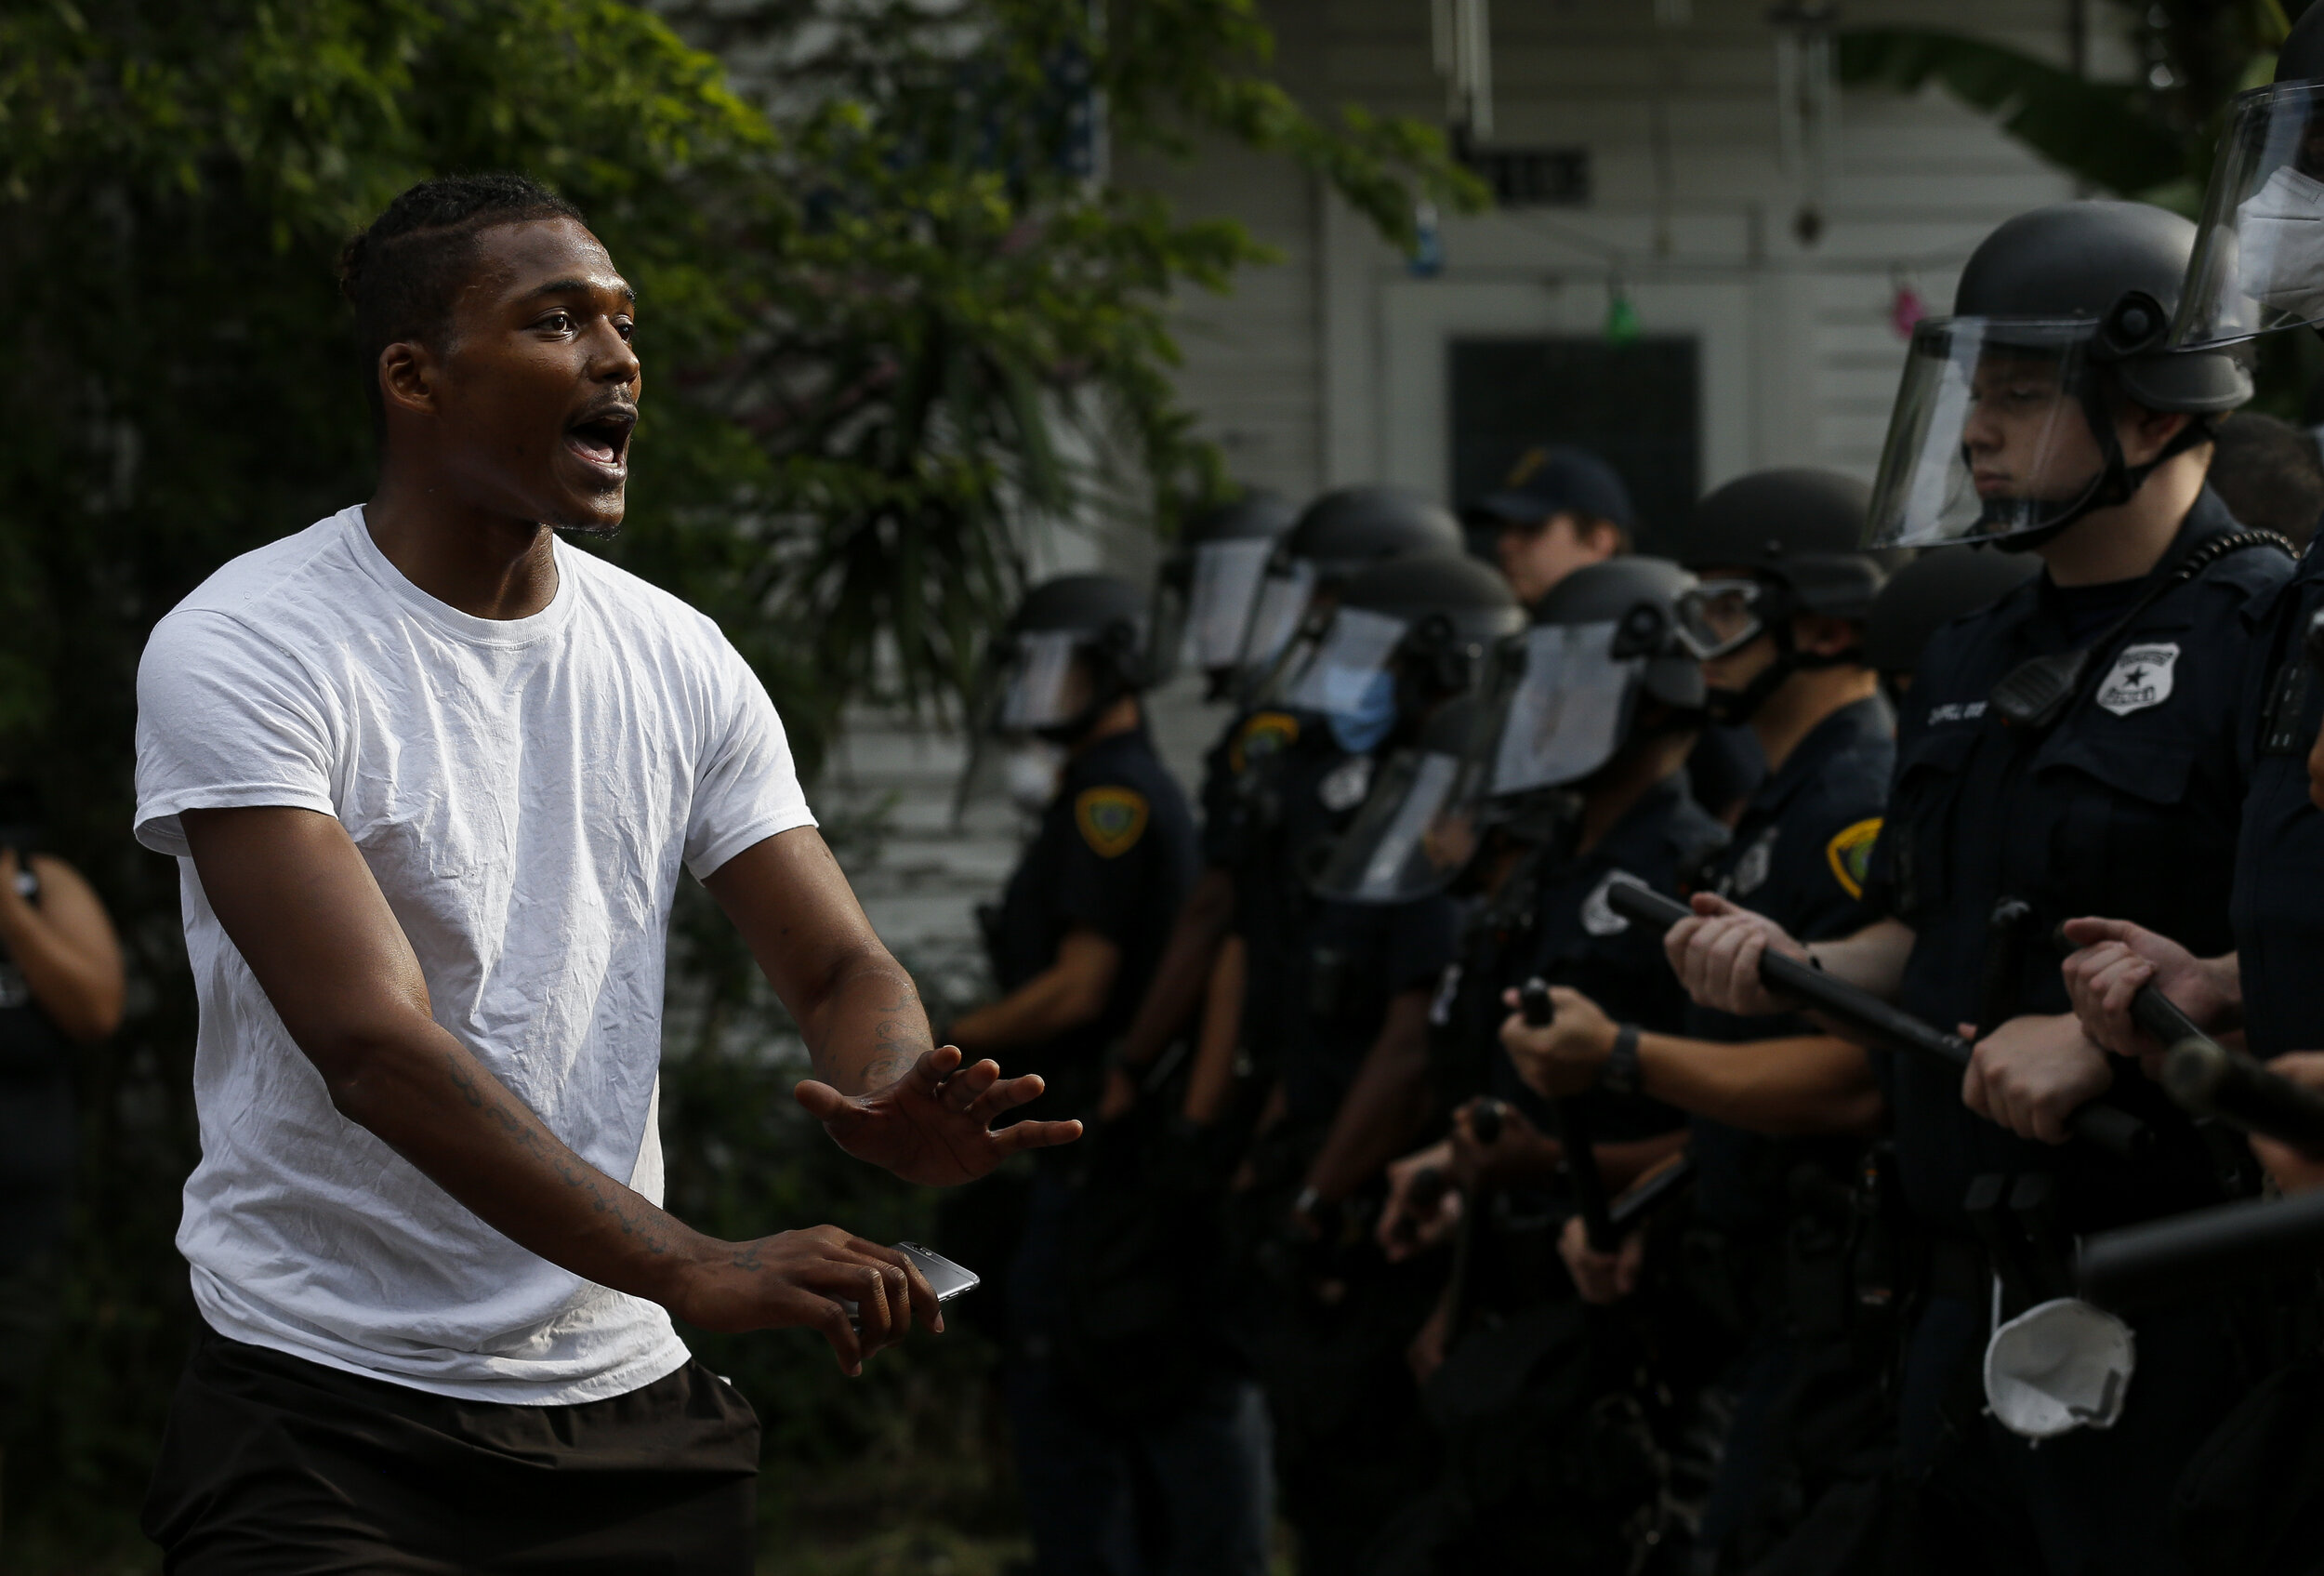  Jordan Hill, left, asks Houston Police officers to remain calm as officers blocked Elgin Street from demonstrators marching in protest of the death of former Houston resident George Floyd on Saturday, May 30, 2020, in Houston, Texas. Floyd died whil